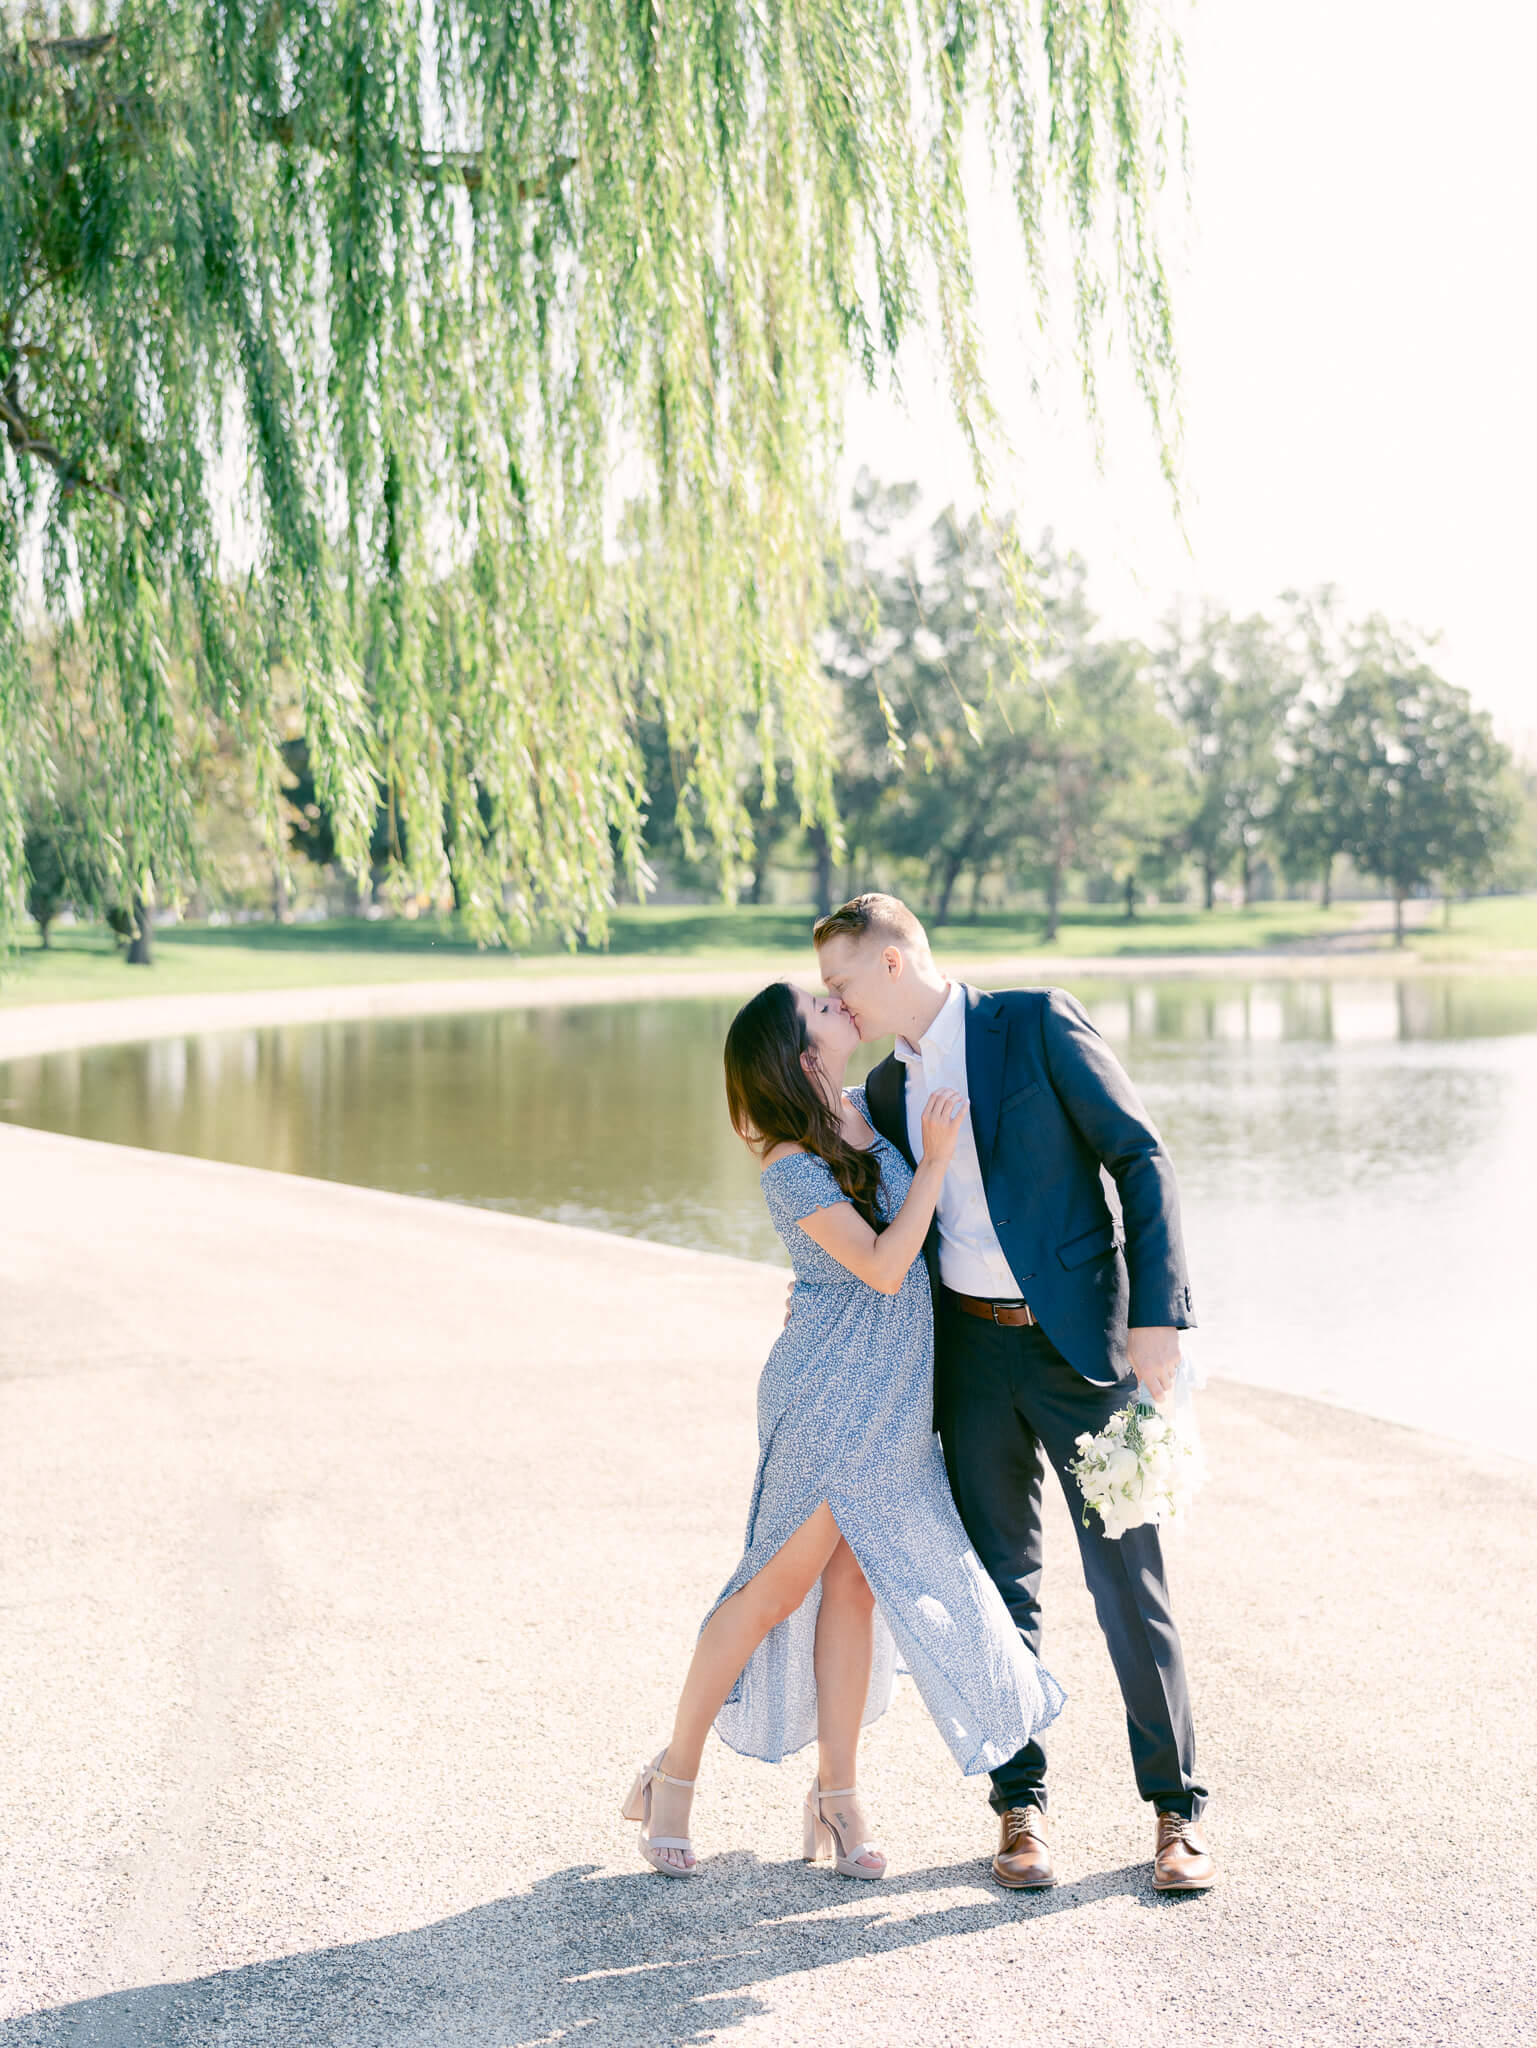 A man in a blue suit kissing a woman in a blue dress underneath a willow tree by a pond.